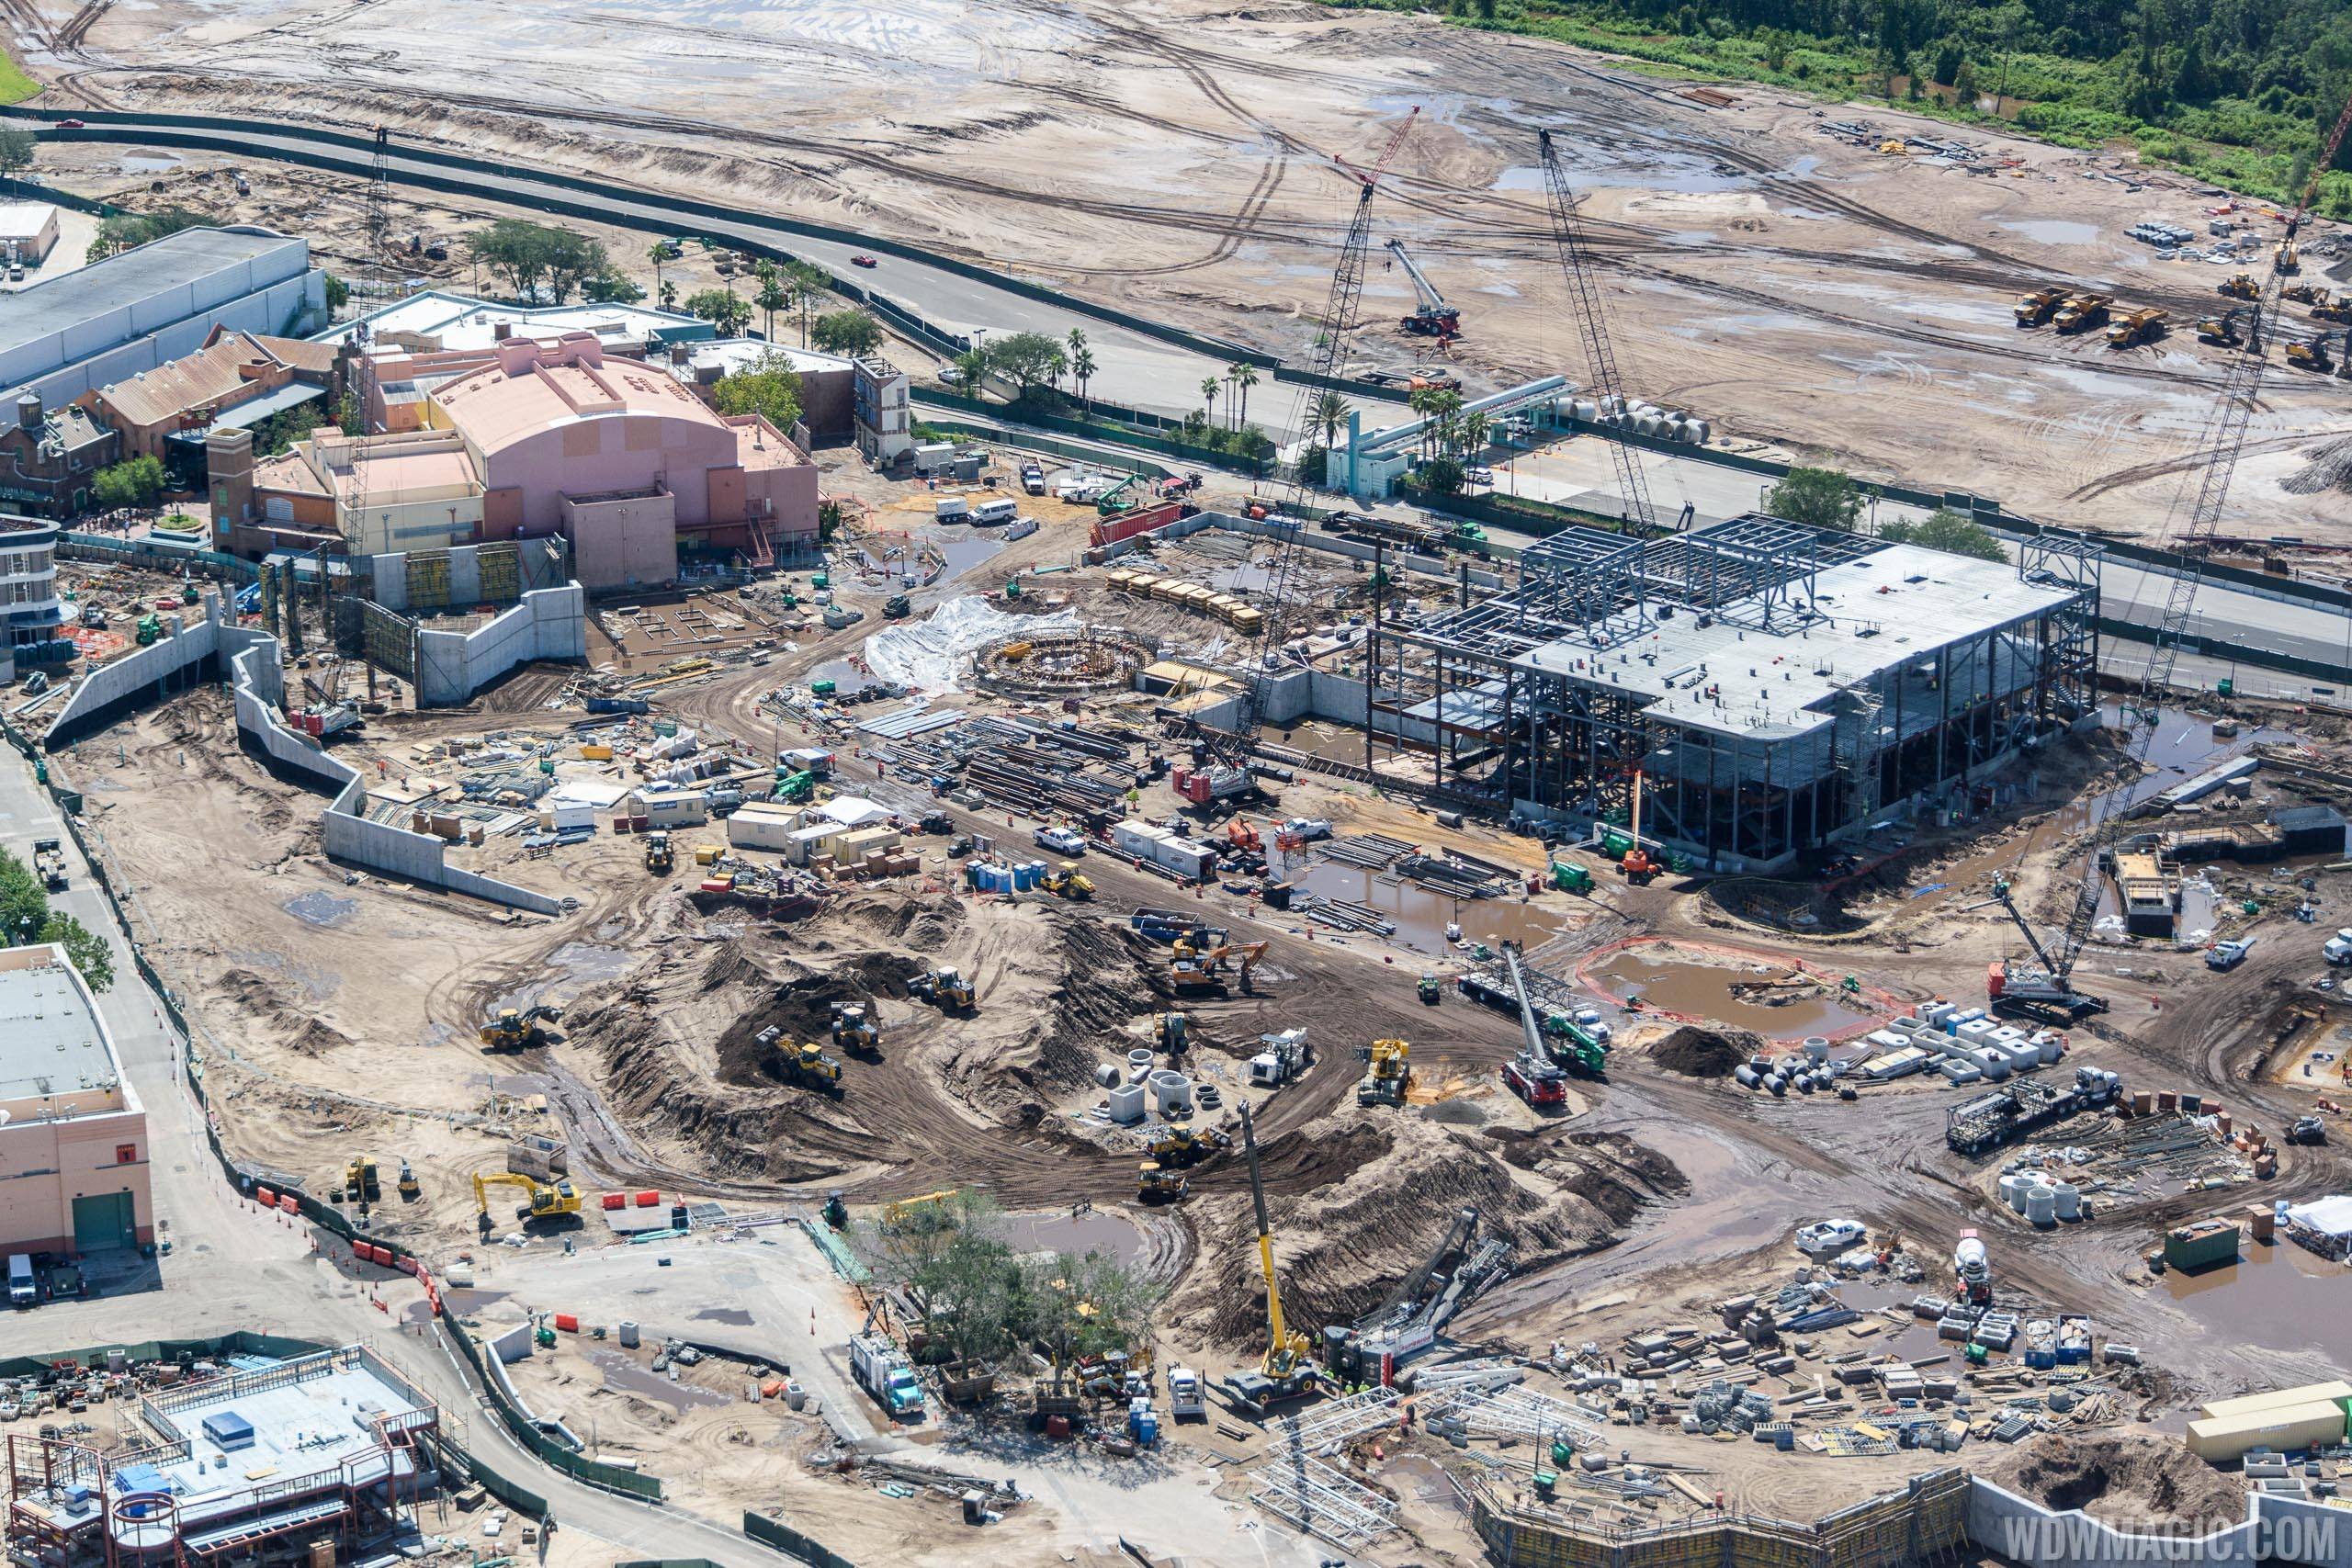 Star Wars Galaxy's Edge wide view from the air